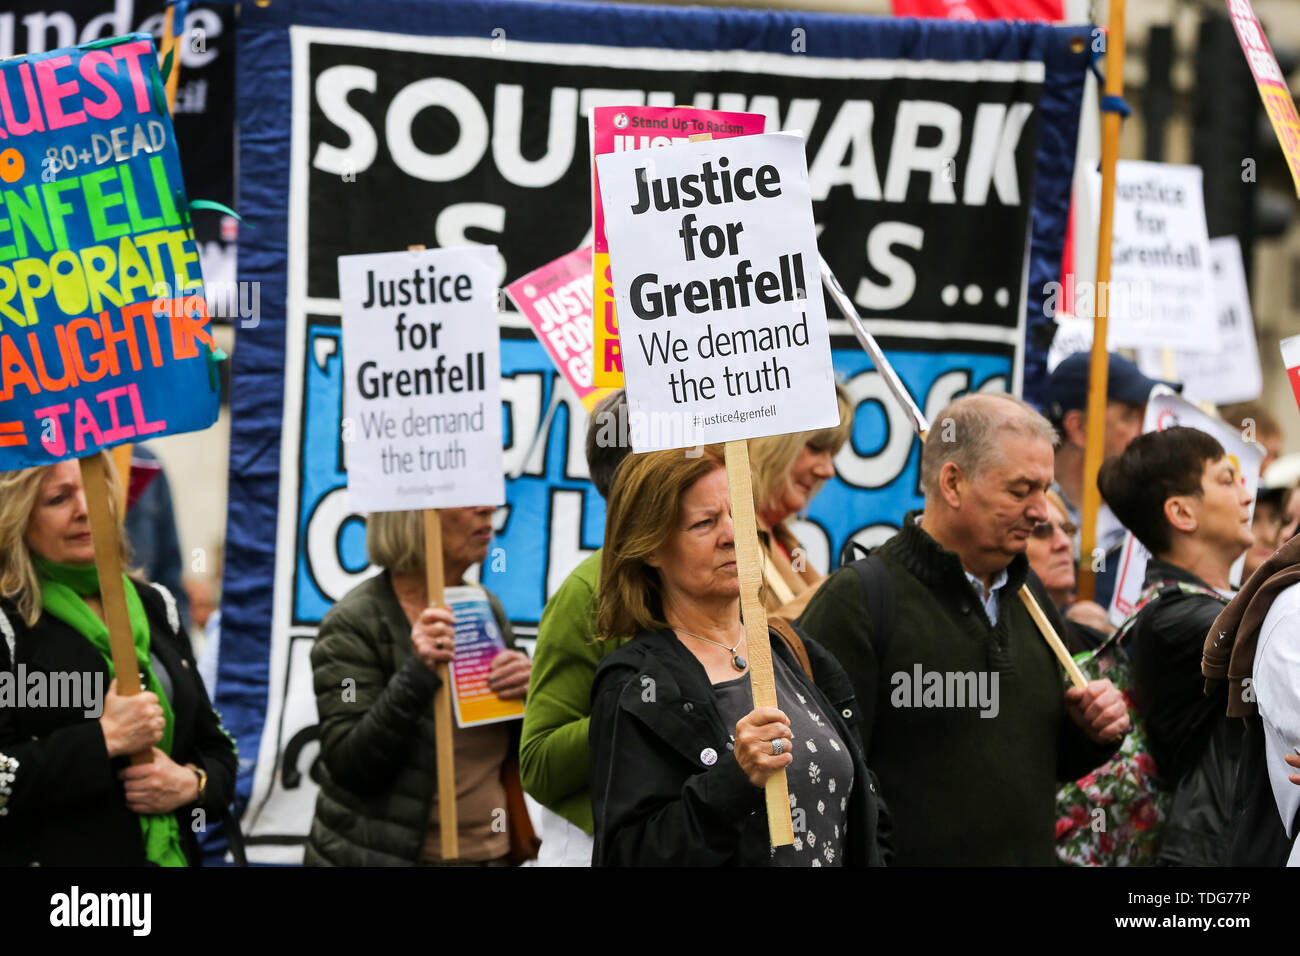 Campaigners hold placards during the Justice for Grenfell Solidarity rally against the lack of action by the Government following the Grenfell Tower fire, in rehousing affected families, delays in the Public Inquiry, tower blocks still covered in flammable cladding, soil contamination and the performance of Royal Borough of Kensington and Chelsea. On 14 June 2017, just before 1:00 am a fire broke out in the kitchen of the fourth floor flat at the 24-storey residential tower block in North Kensington, West London, which took the lives of 72 people. More than 70 others were injured and 223 peopl Stock Photo